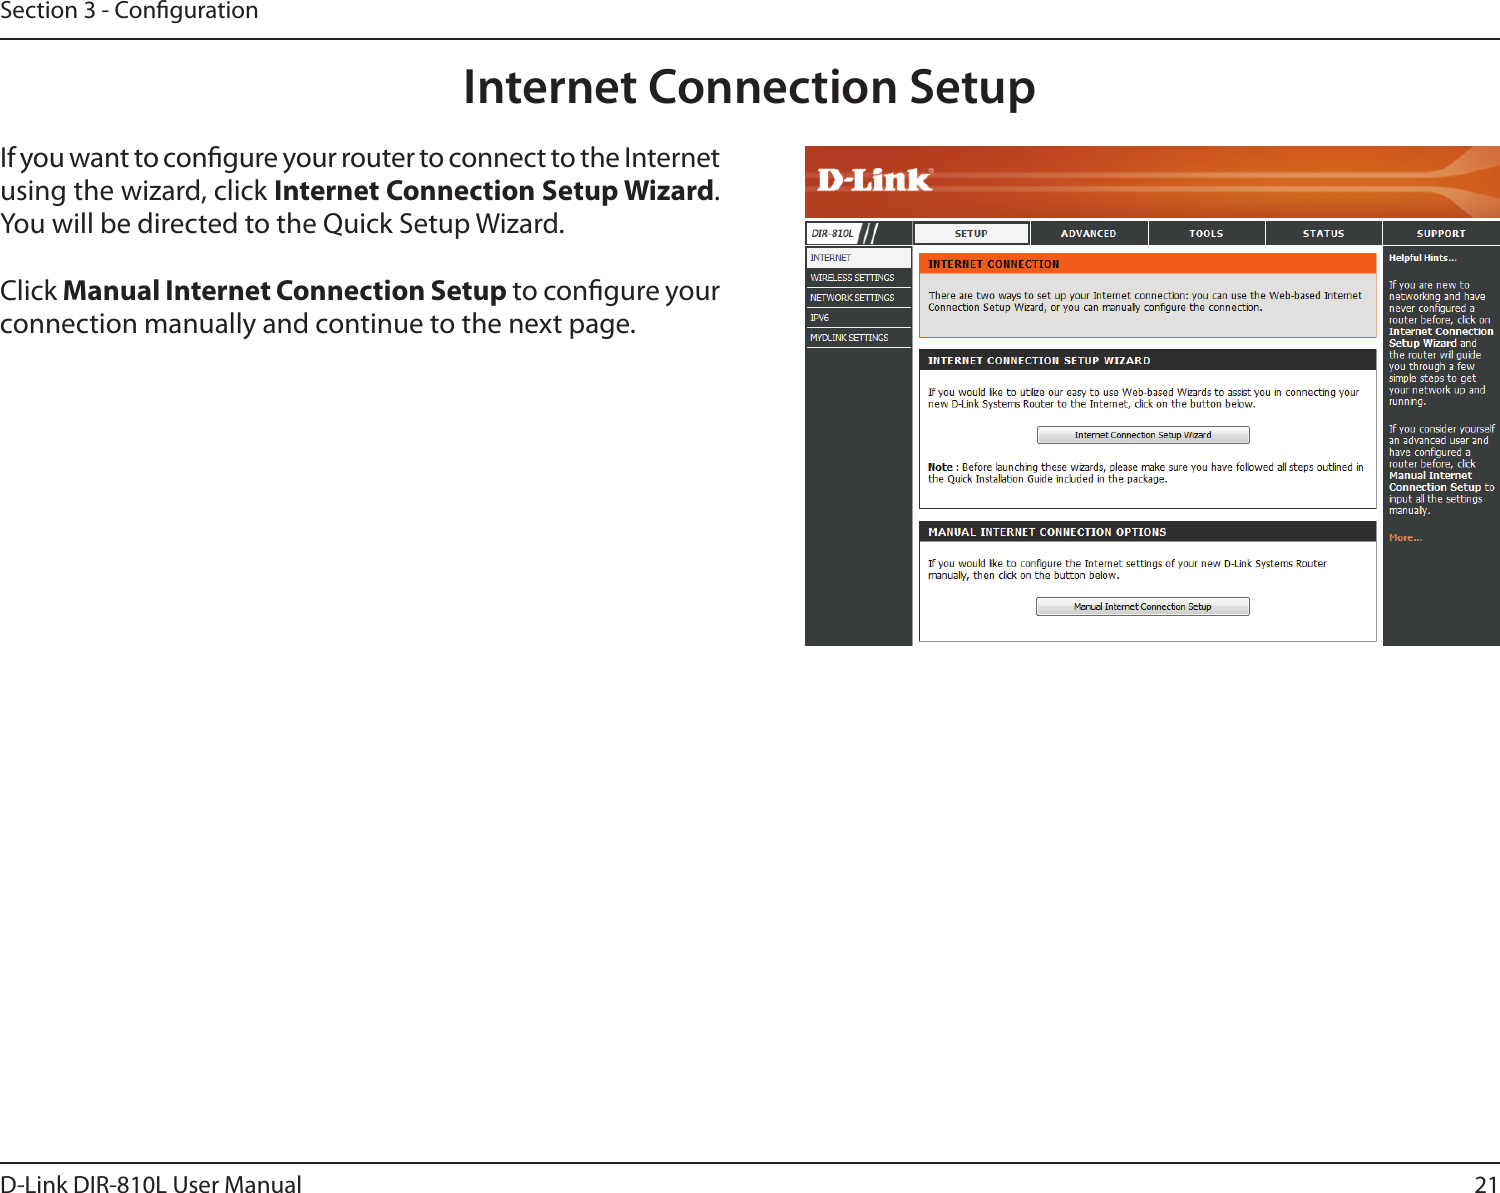 21D-Link DIR-810L User ManualSection 3 - CongurationInternet Connection SetupIf you want to congure your router to connect to the Internet using the wizard, click Internet Connection Setup Wizard. You will be directed to the Quick Setup Wizard. Click Manual Internet Connection Setup to congure your connection manually and continue to the next page.